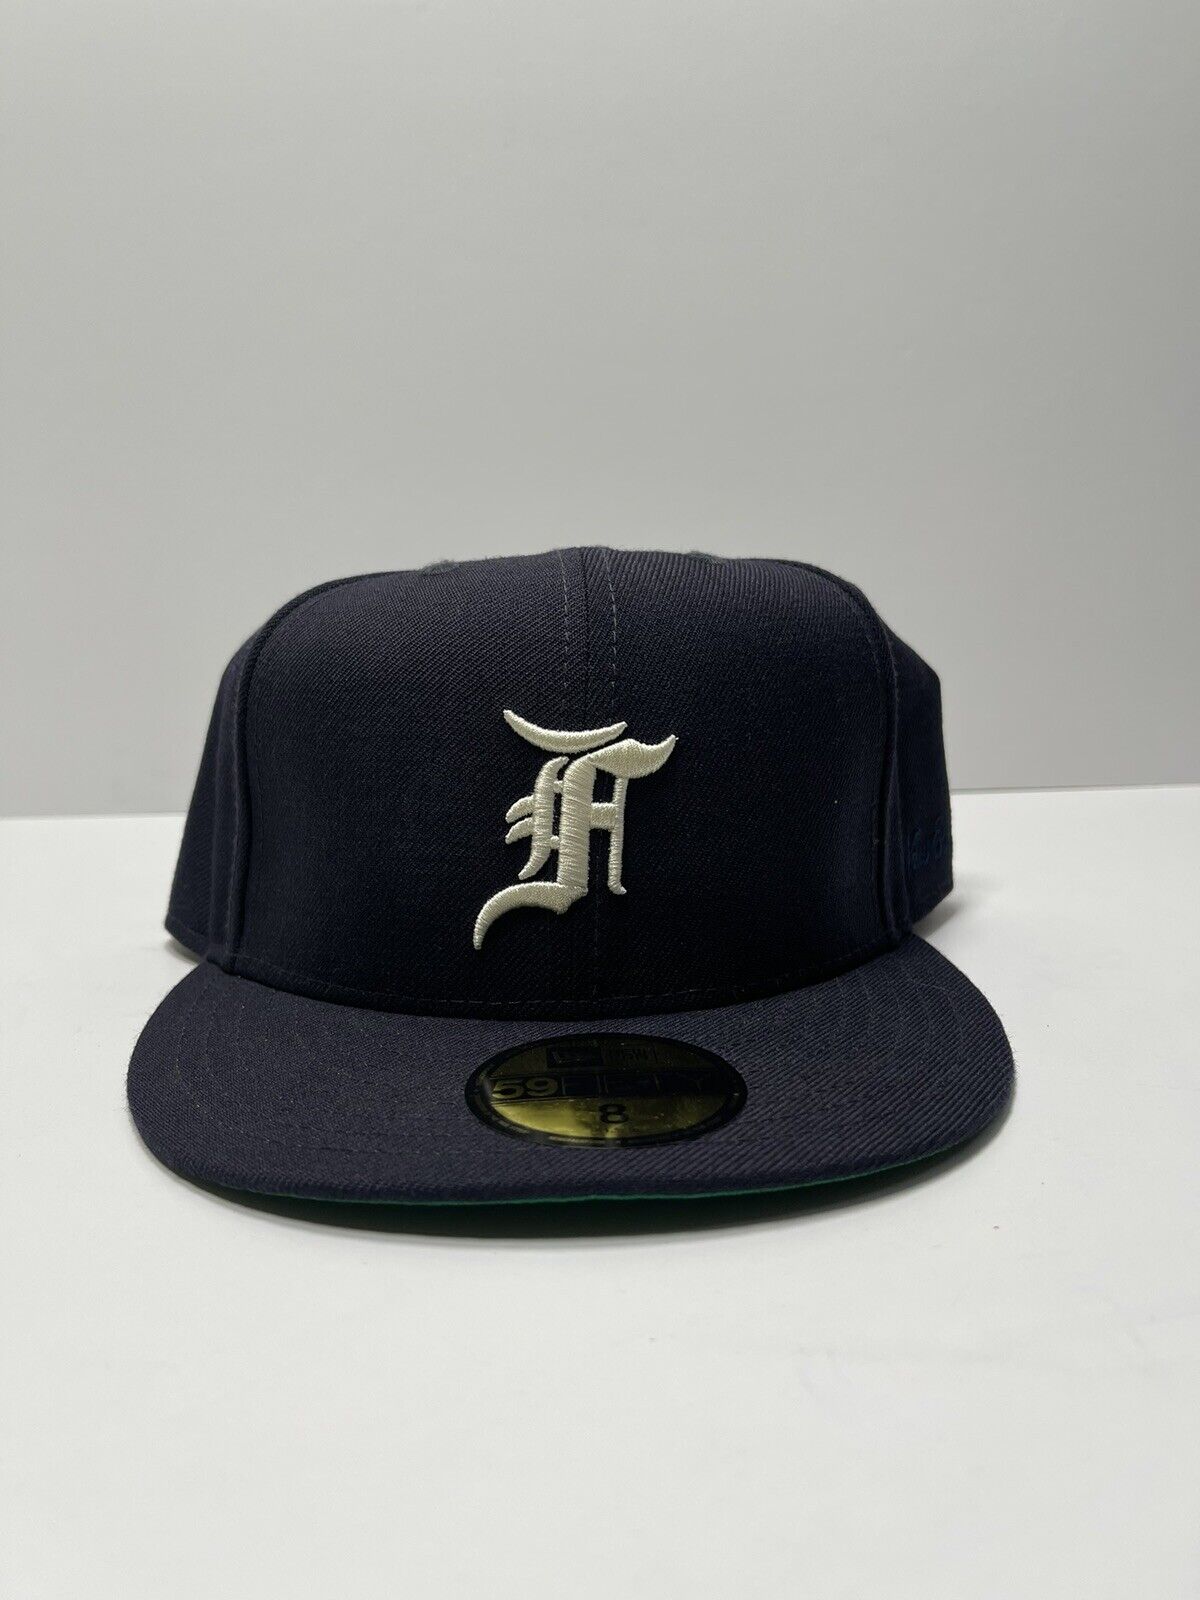 New Era Fear of God ESSENTIAL Fitted Cap Hat MLB 5950 Pro Model 